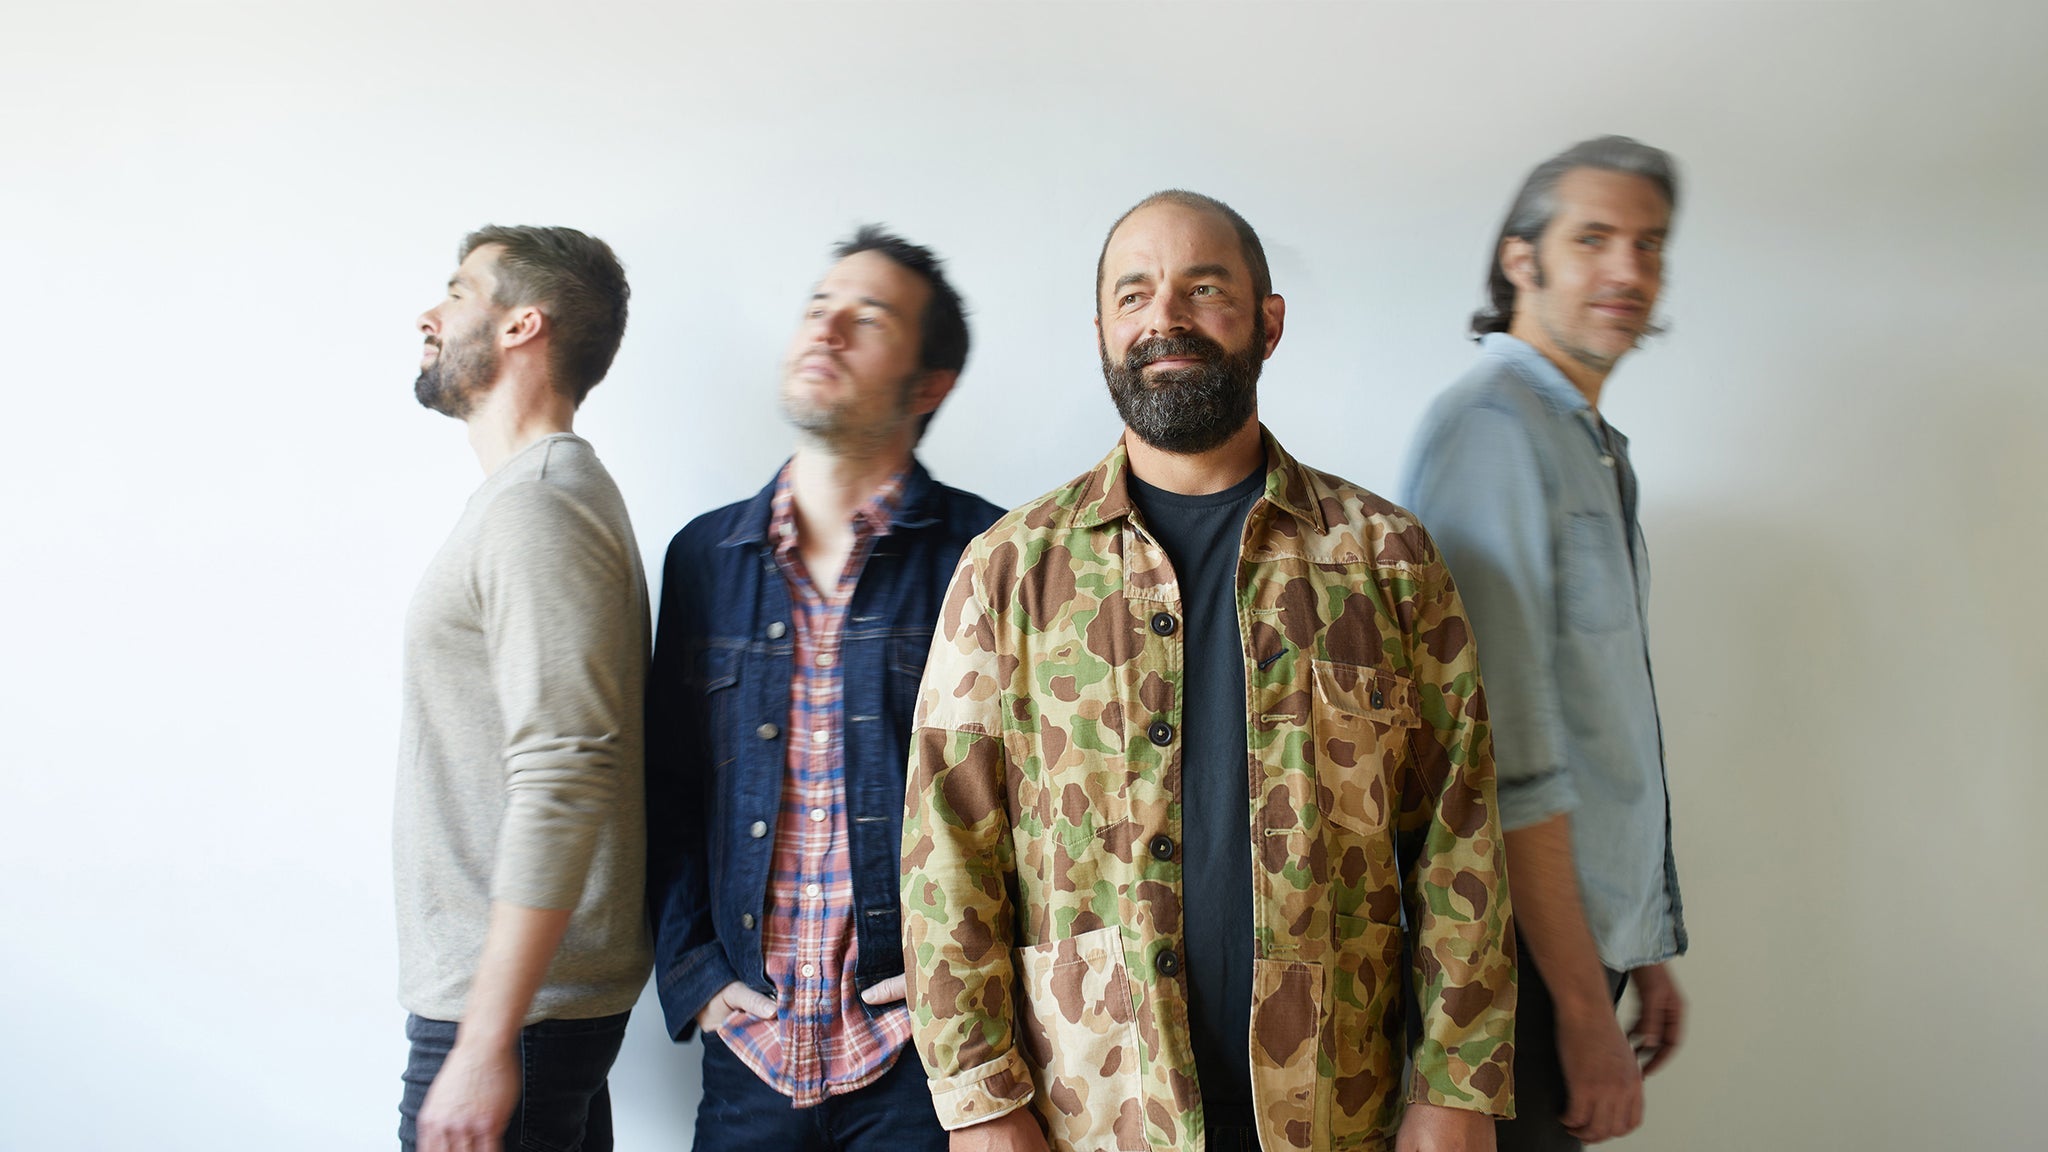 Drew Holcomb & The Neighbors with special guest Donovan Woods